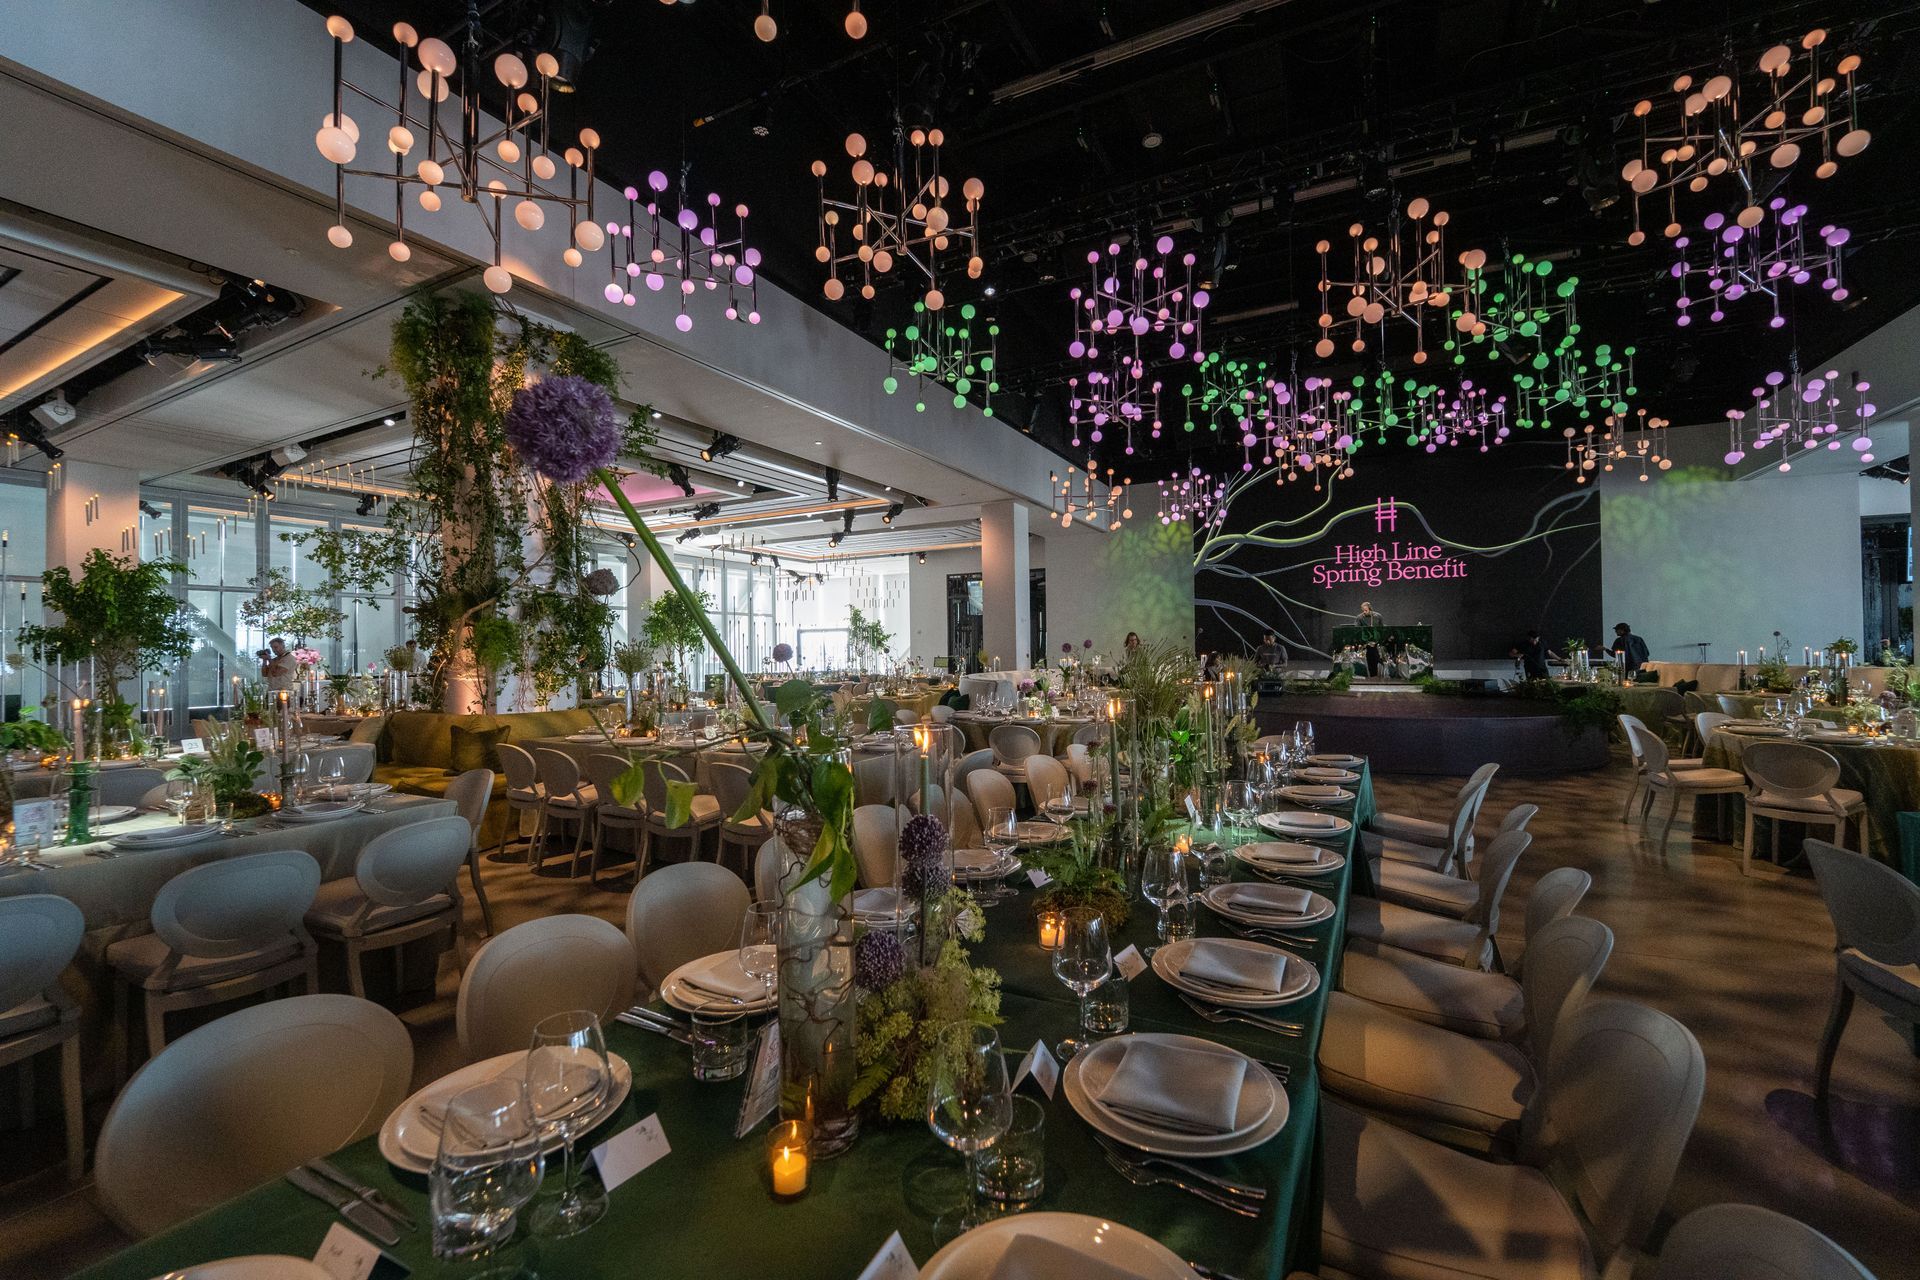 High line gala at The Glasshouse- a large room filled with lots of plants and a waterfall .